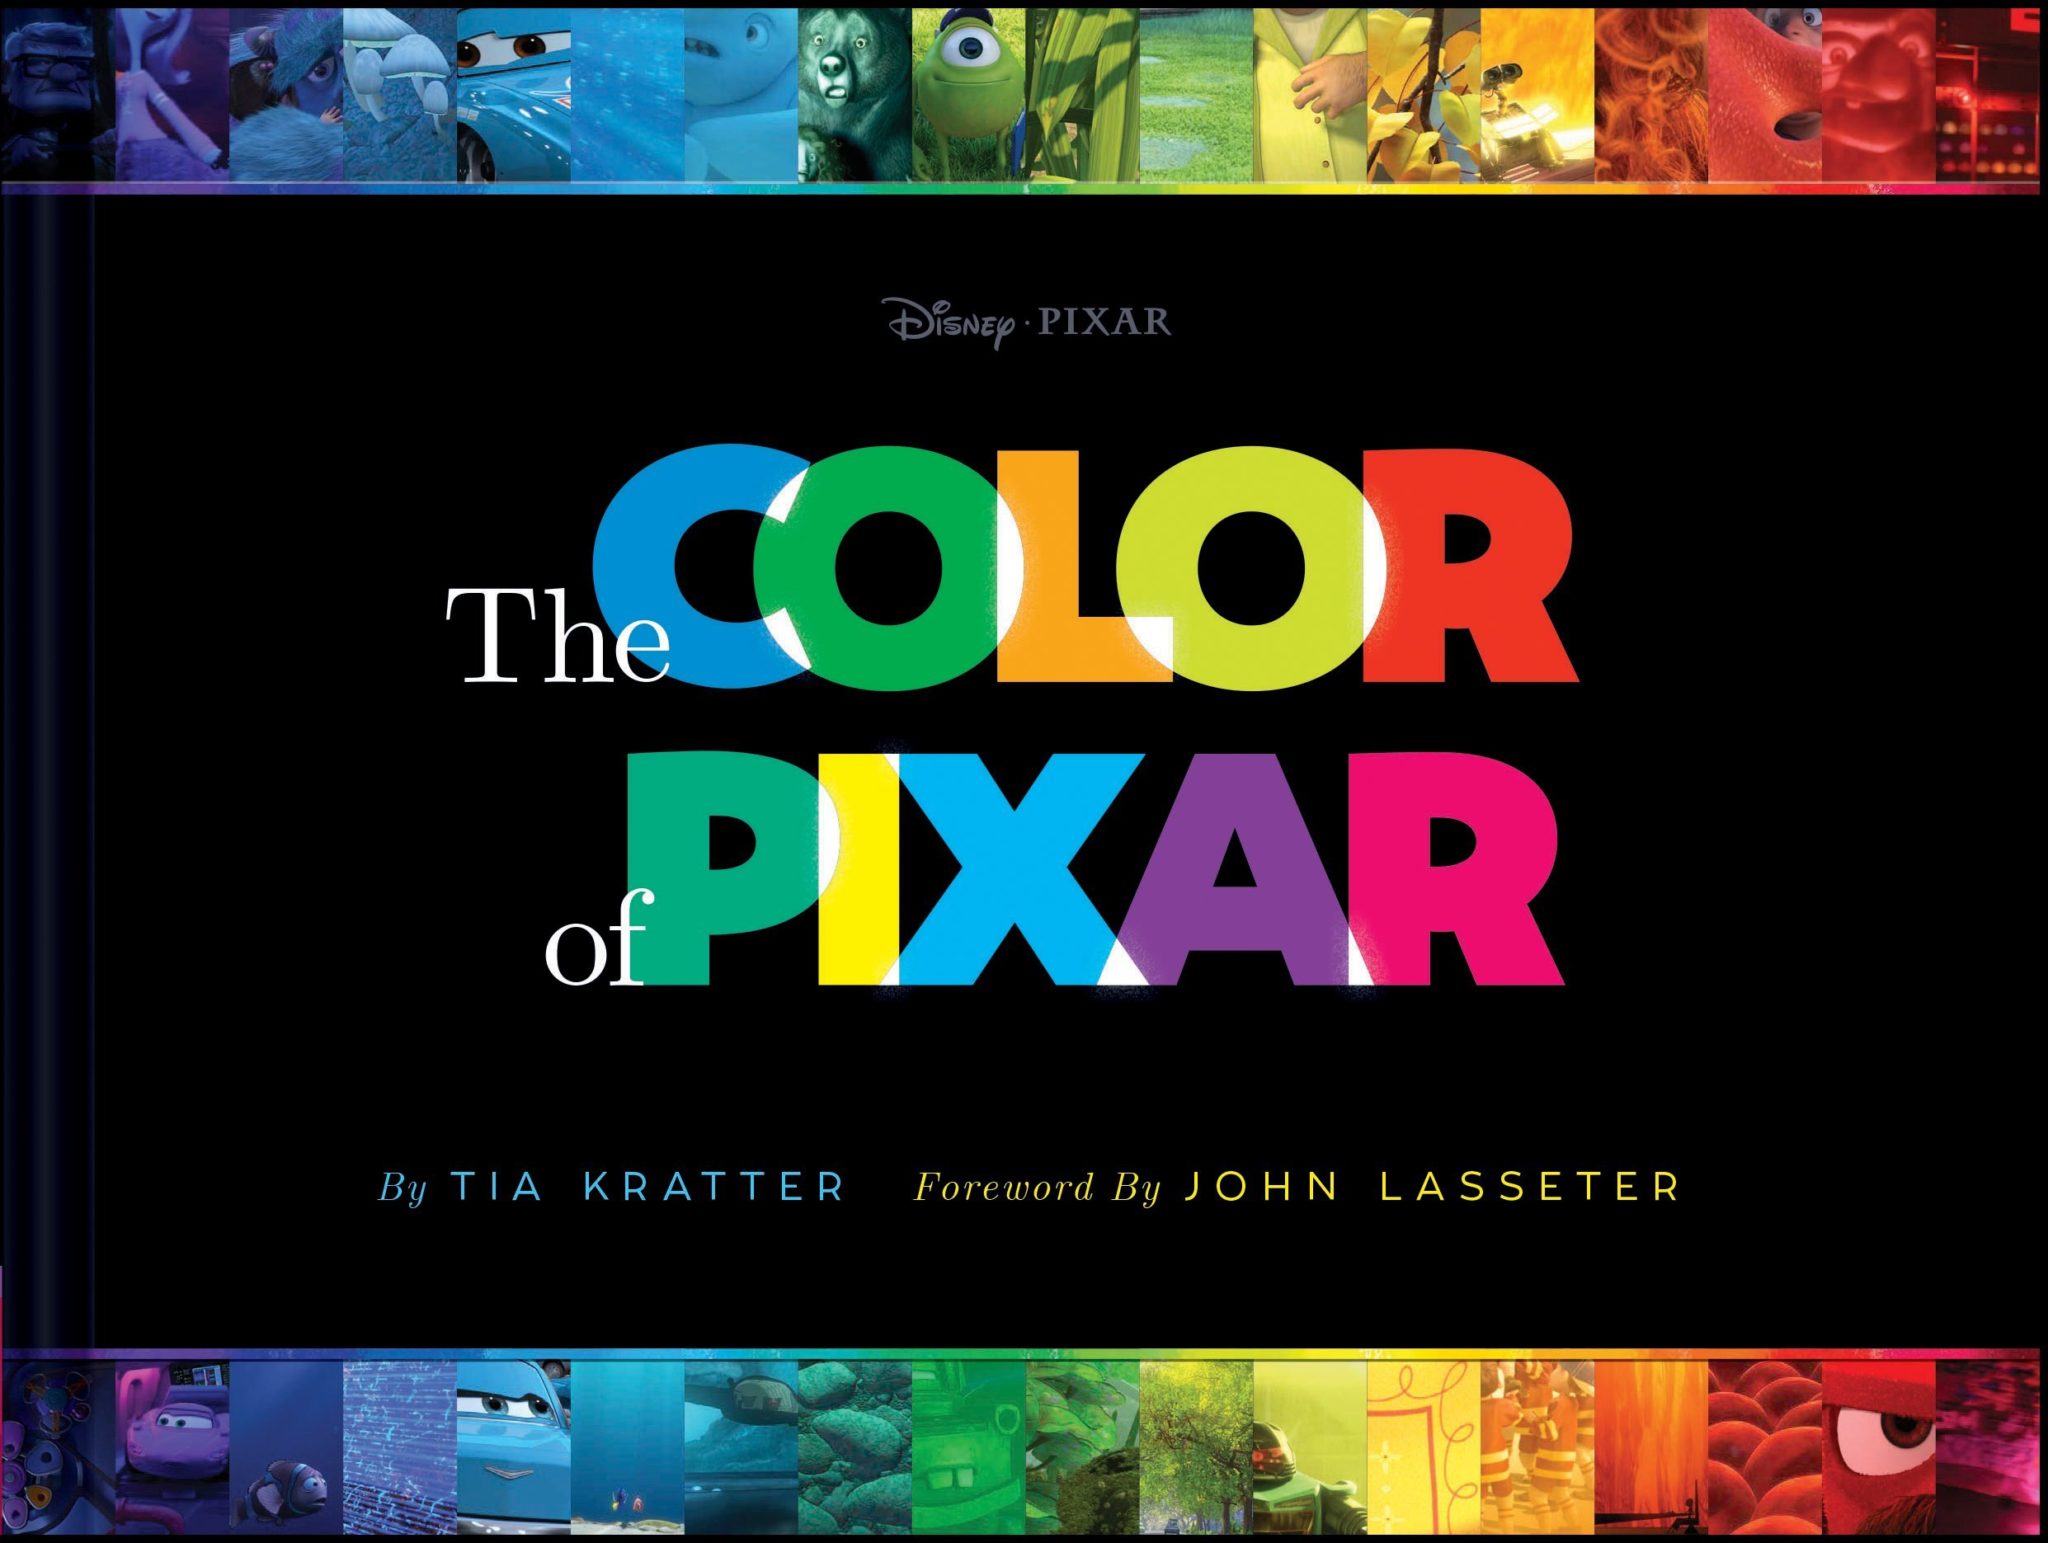 [BOOK REVIEW] The Color of Pixar